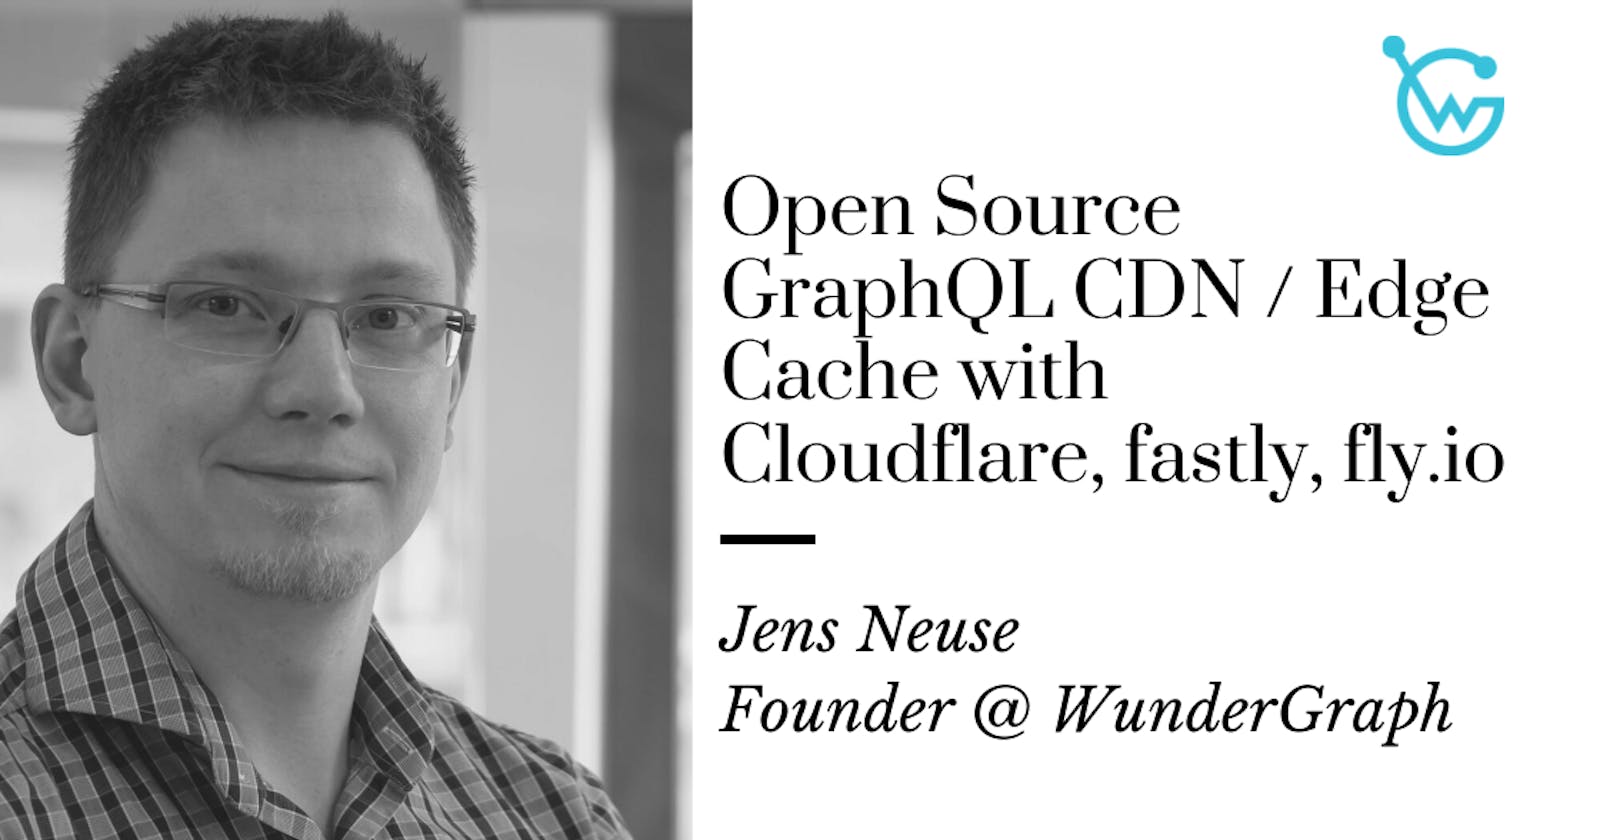 Open Source GraphQL CDN / Edge Cache with Cloudflare, Fastly, and Fly.io